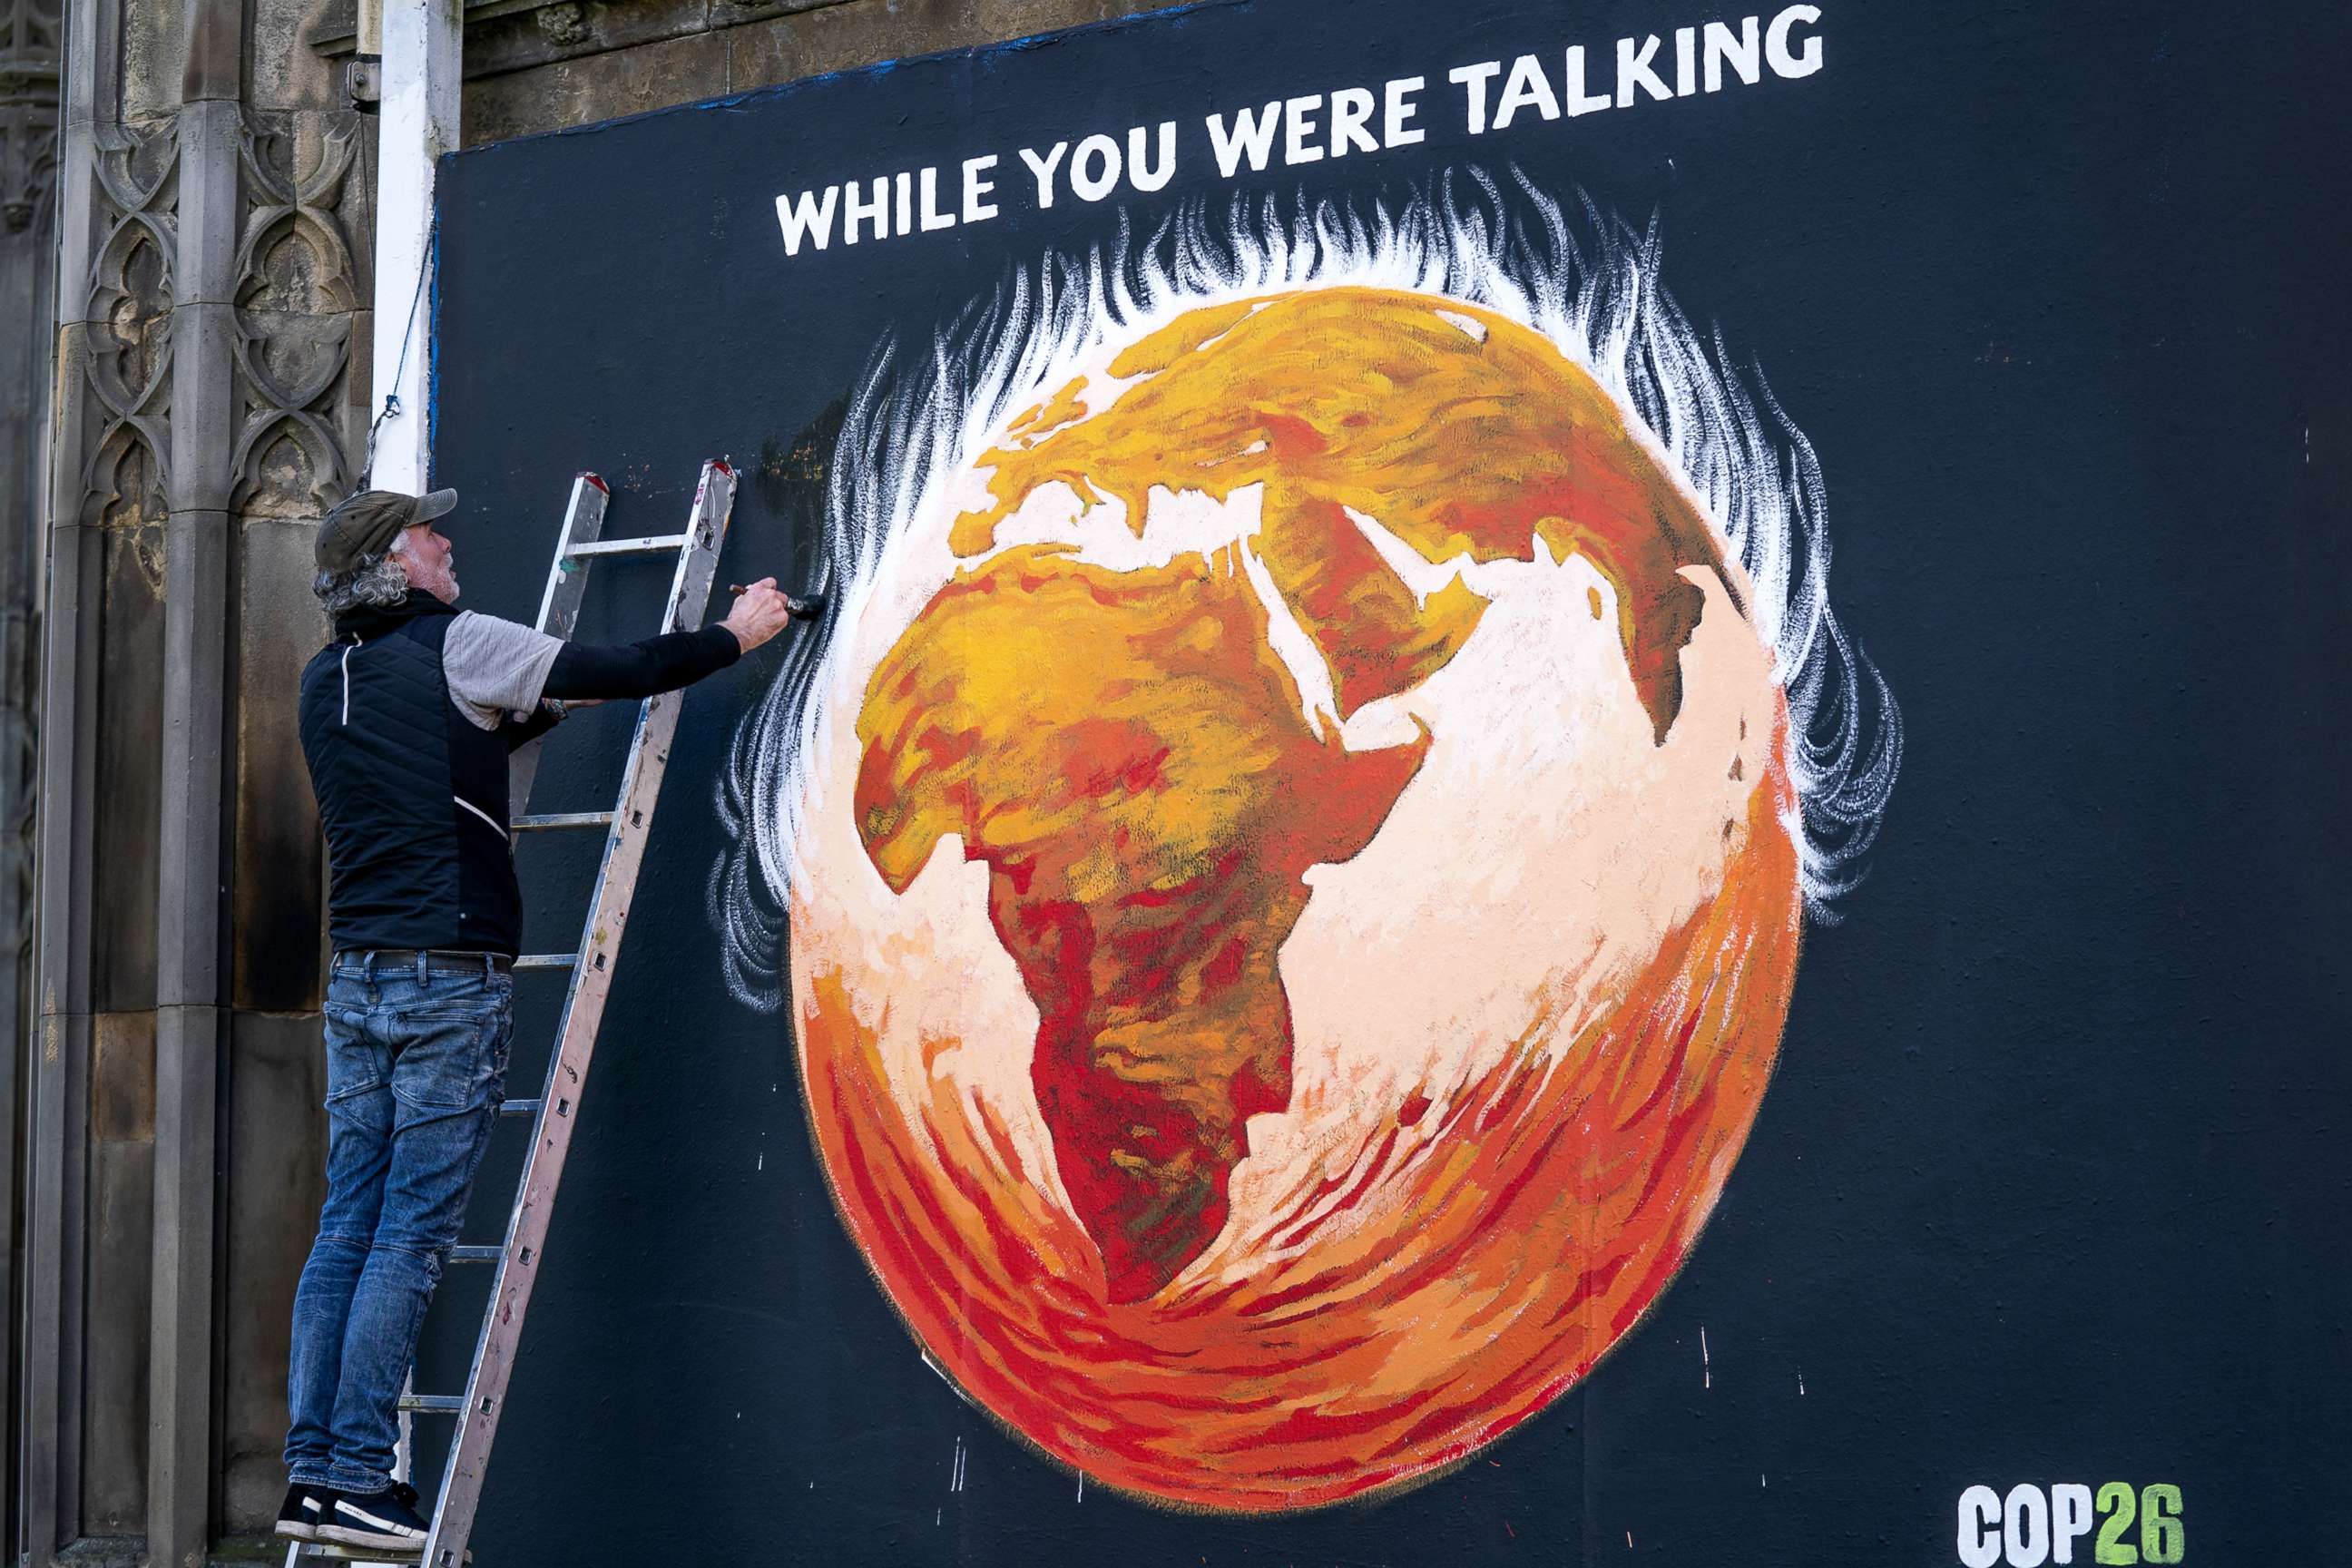 PHOTO: Artist Greg Mitchell completes his climate-crisis themed mural that depicts the Earth on fire and reads "While you were talking," on the side of St. John's Church in Edinburgh, Scotland, Oct. 25, 2021, to coincide with the Cop26 in Glasgow.